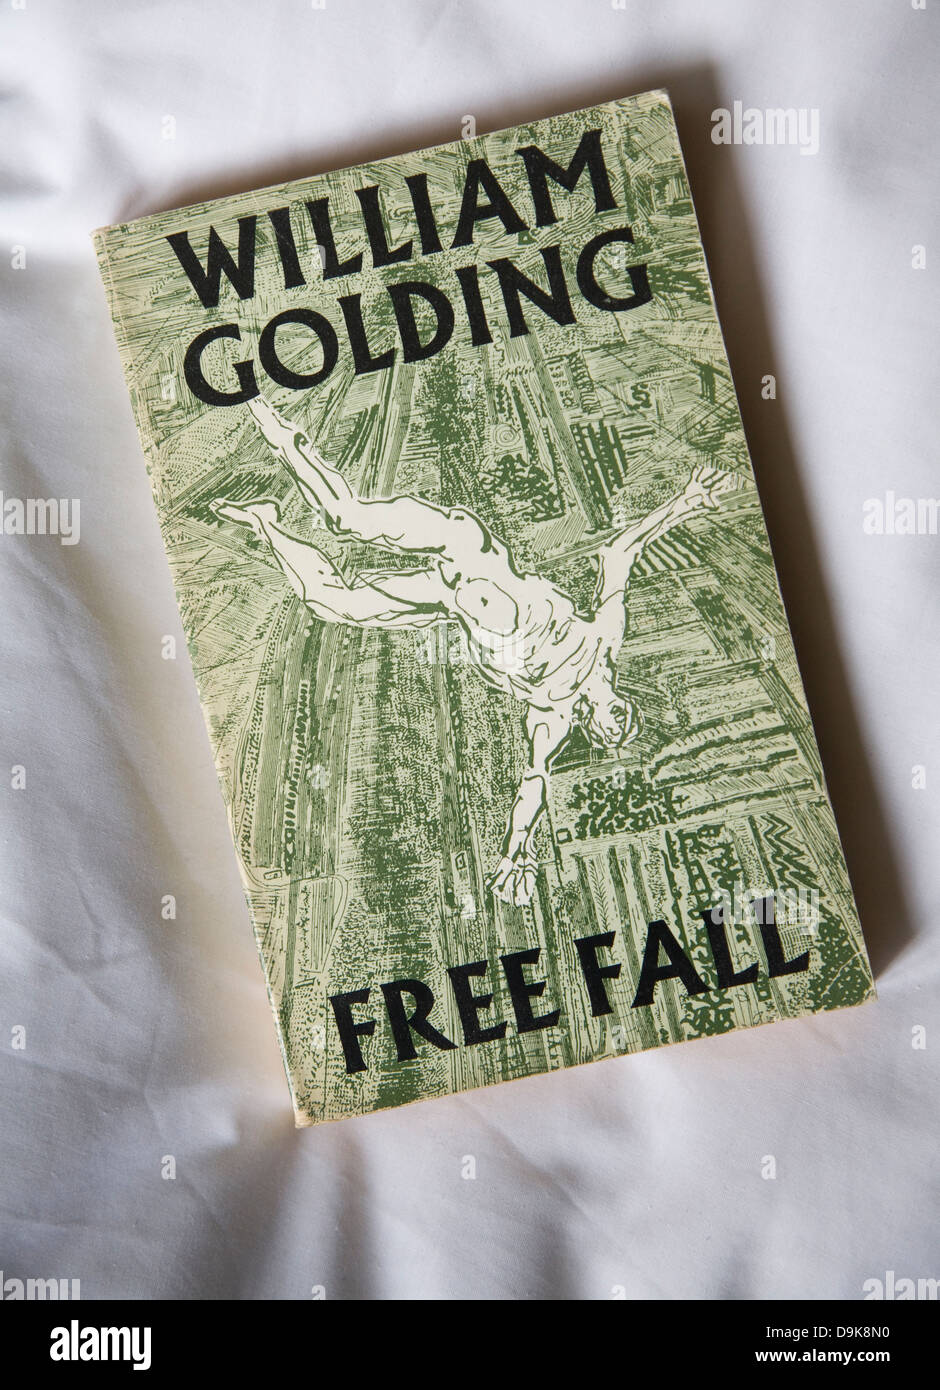 William Golding Free Fall Faber edition book cover drawing by Anthony Goss Stock Photo